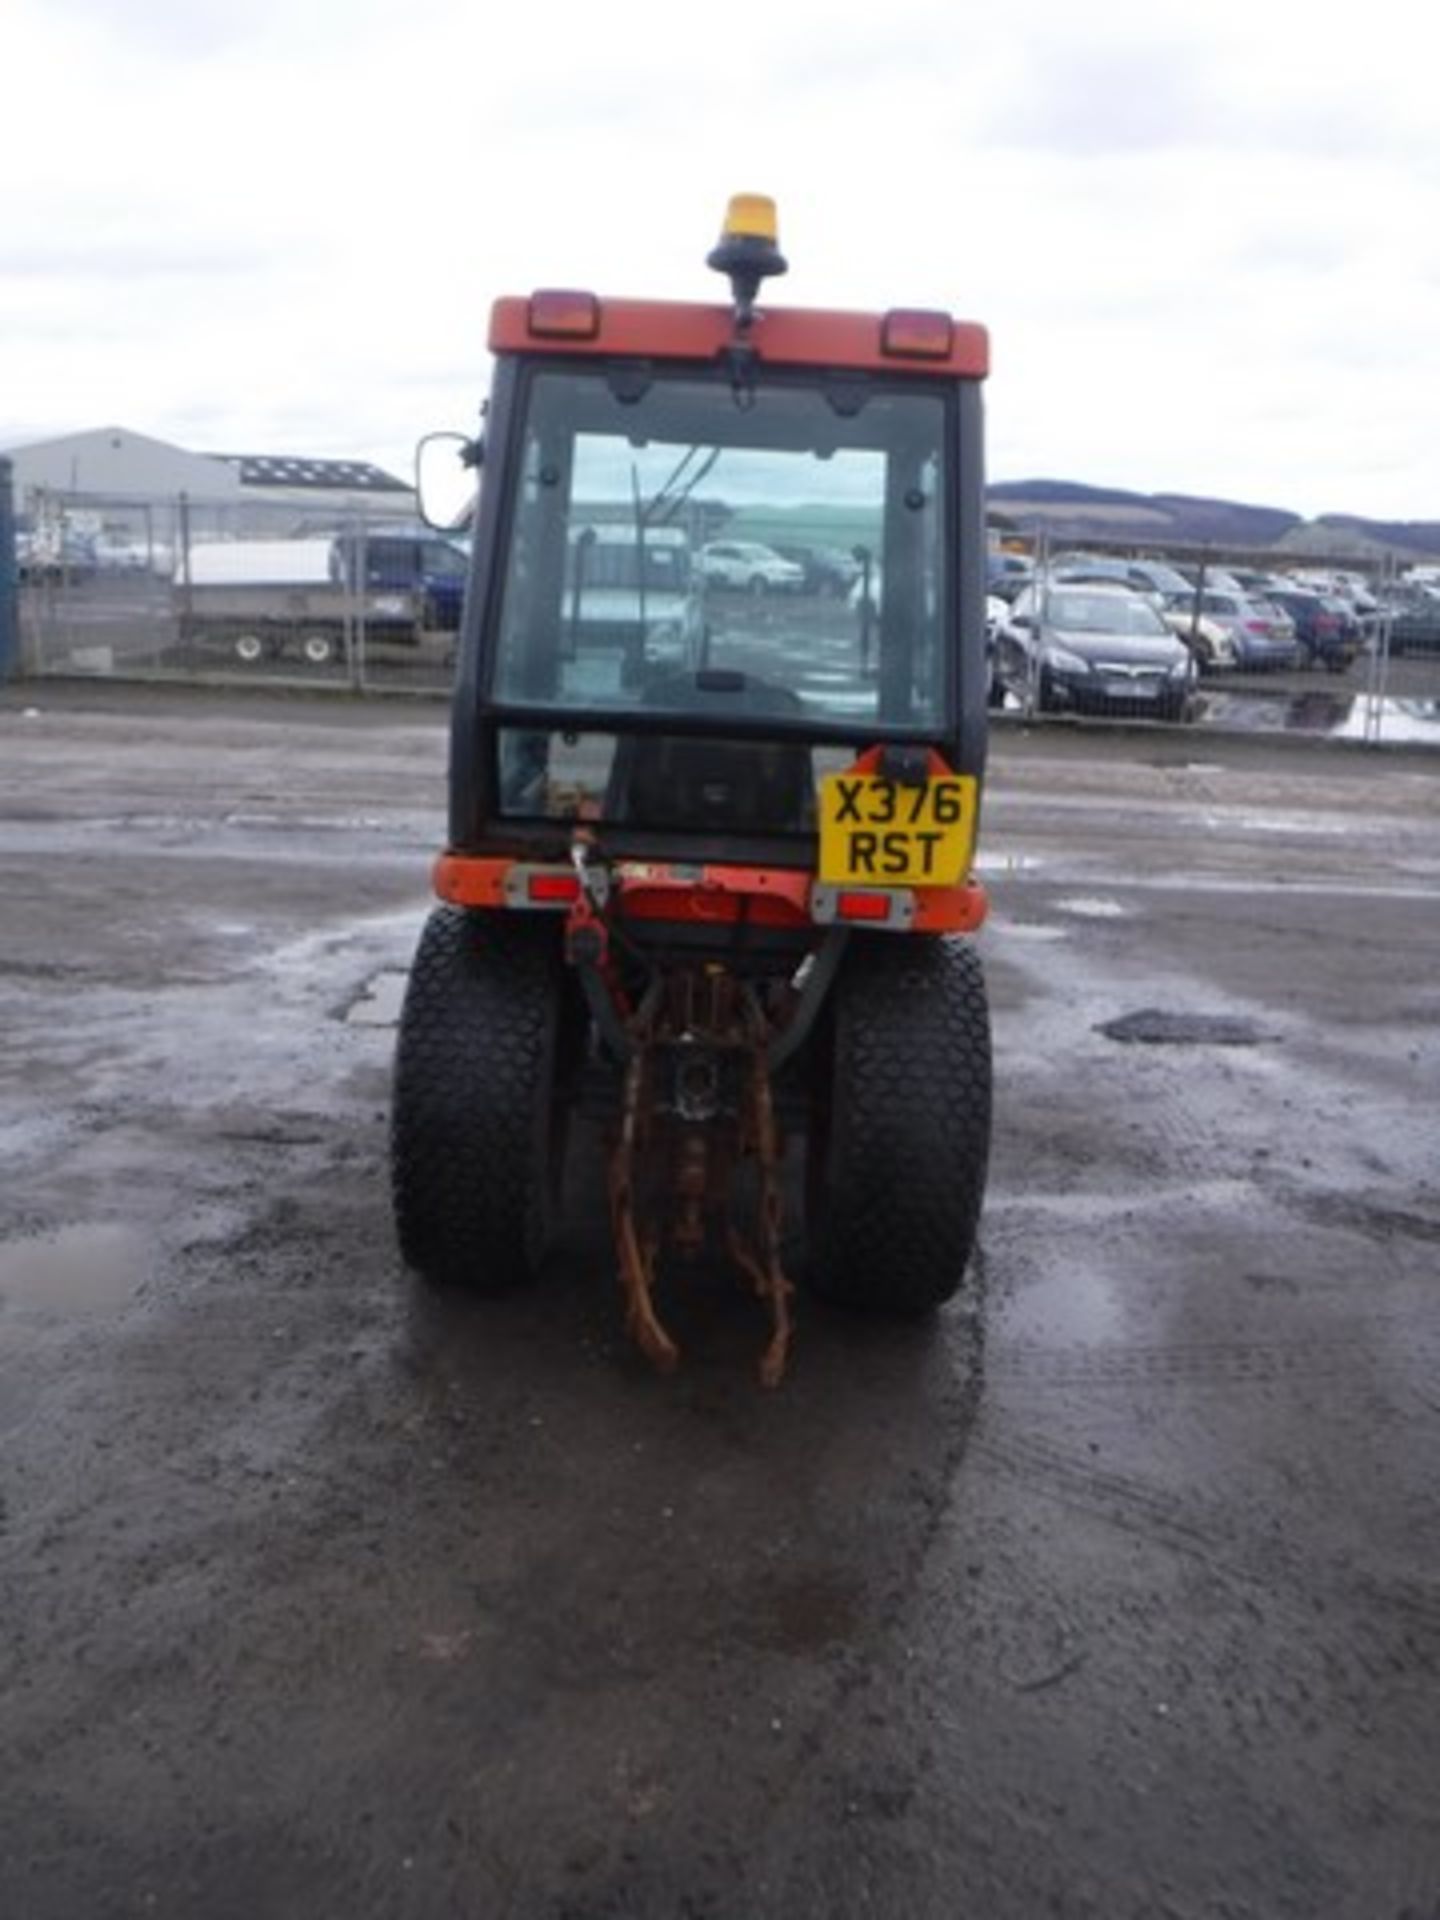 KUBOTA tractor B2100D 2337hrs (not verified) c/w snow plough. V5 in office. - Image 4 of 7